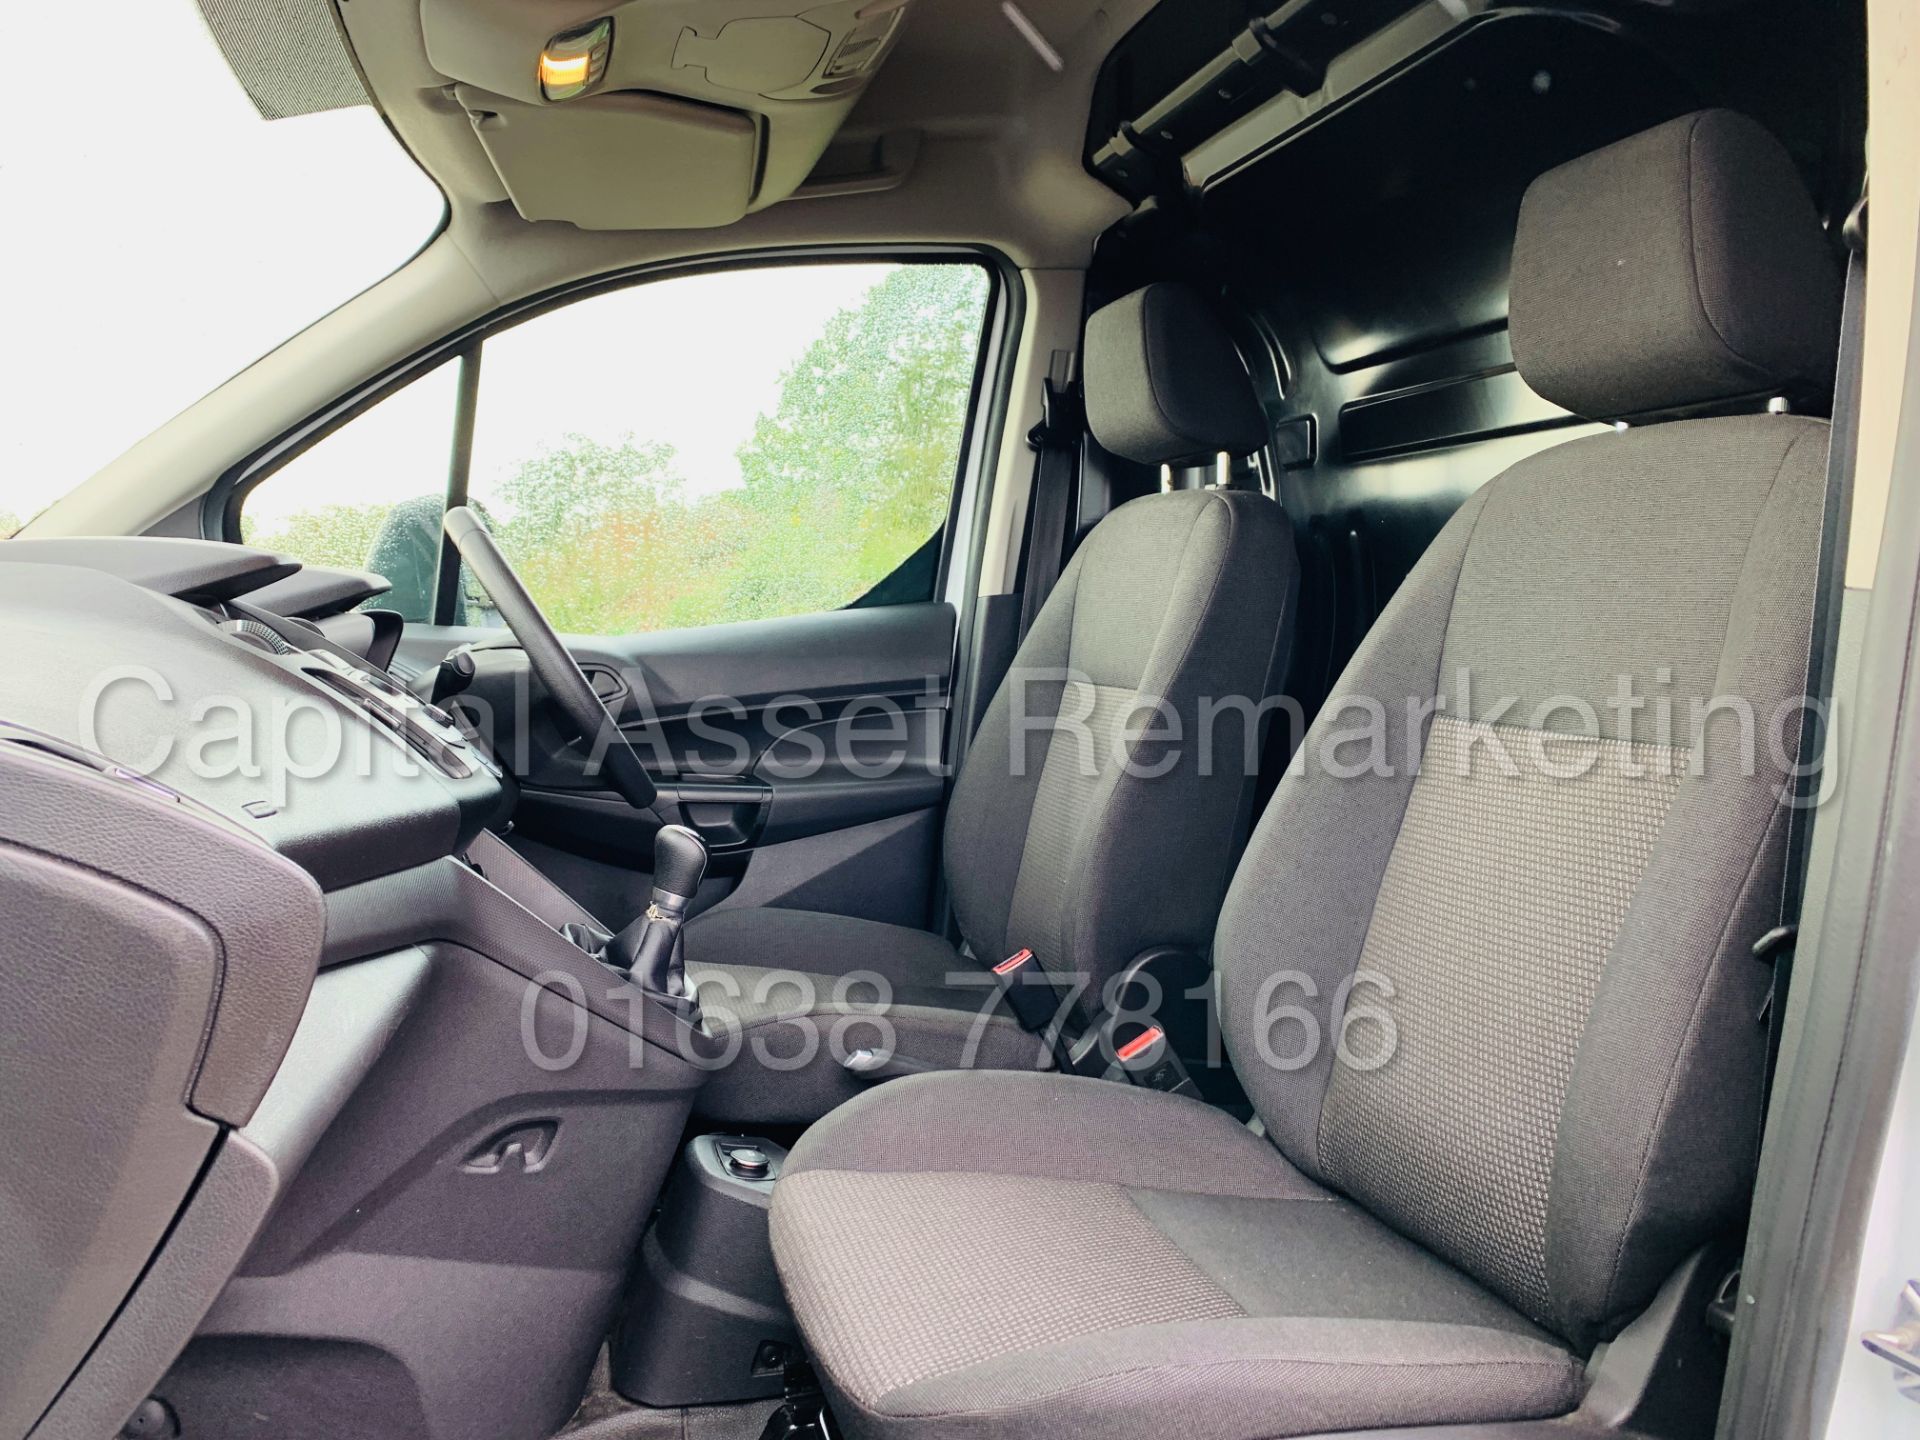 FORD TRANSIT CONNECT 75 T200 *SWB - PANEL VAN* (2018 MODEL) '1.5 TDCI - EURO 6 COMPLIANT' (1 OWNER) - Image 20 of 36